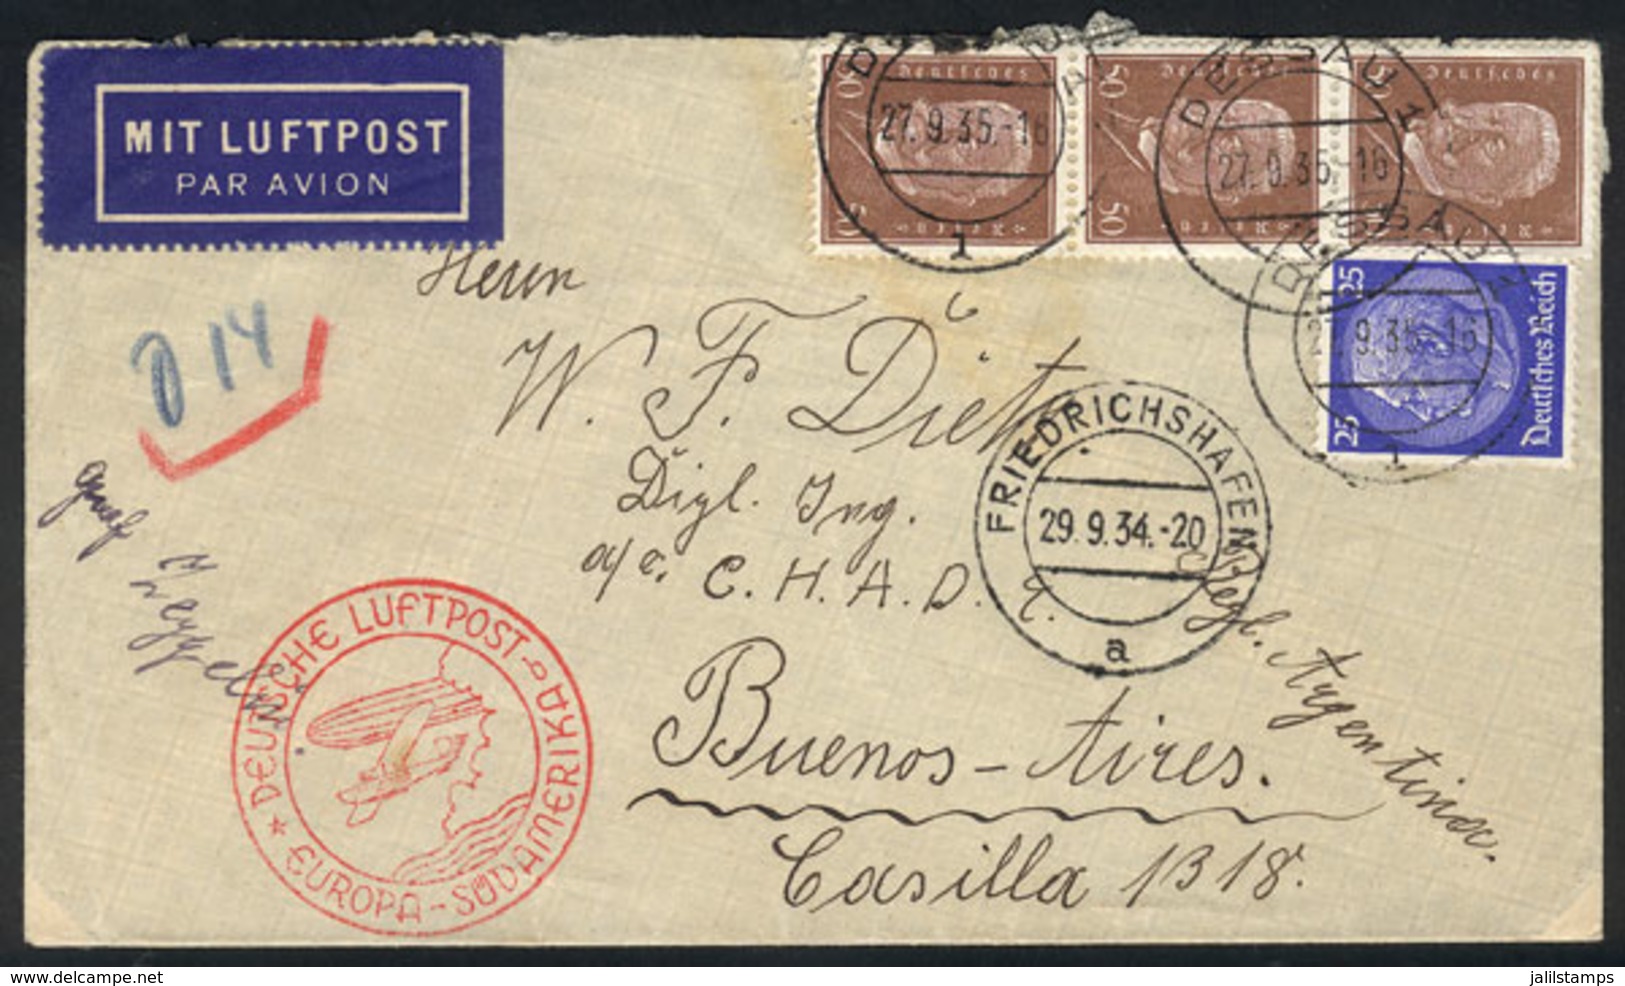 GERMANY: Airmail Cover Flown By ZEPPELIN, Sent From Dessau To Buenos Aires On 27/SE/1935, VF Quality! - Vorphilatelie